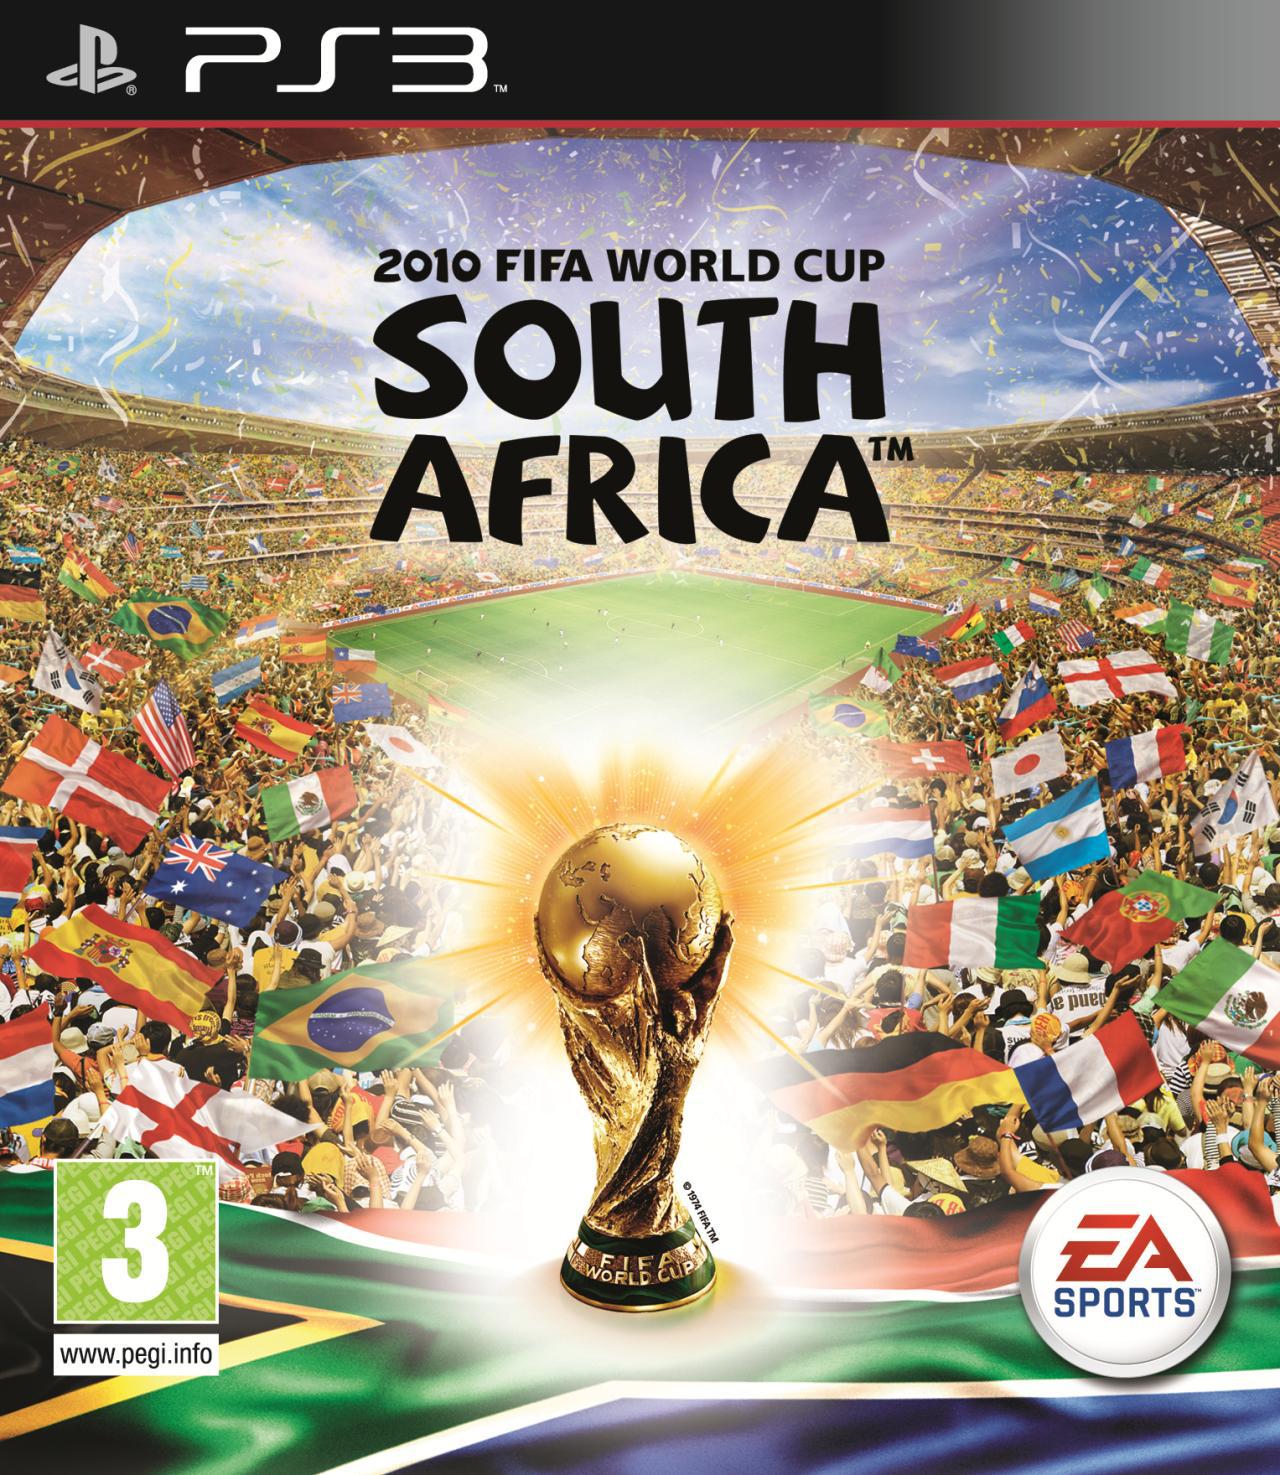 http://www.univers-consoles.com/images/917/divers/171831_fifa-world-cup---south-africa-2010.jpg